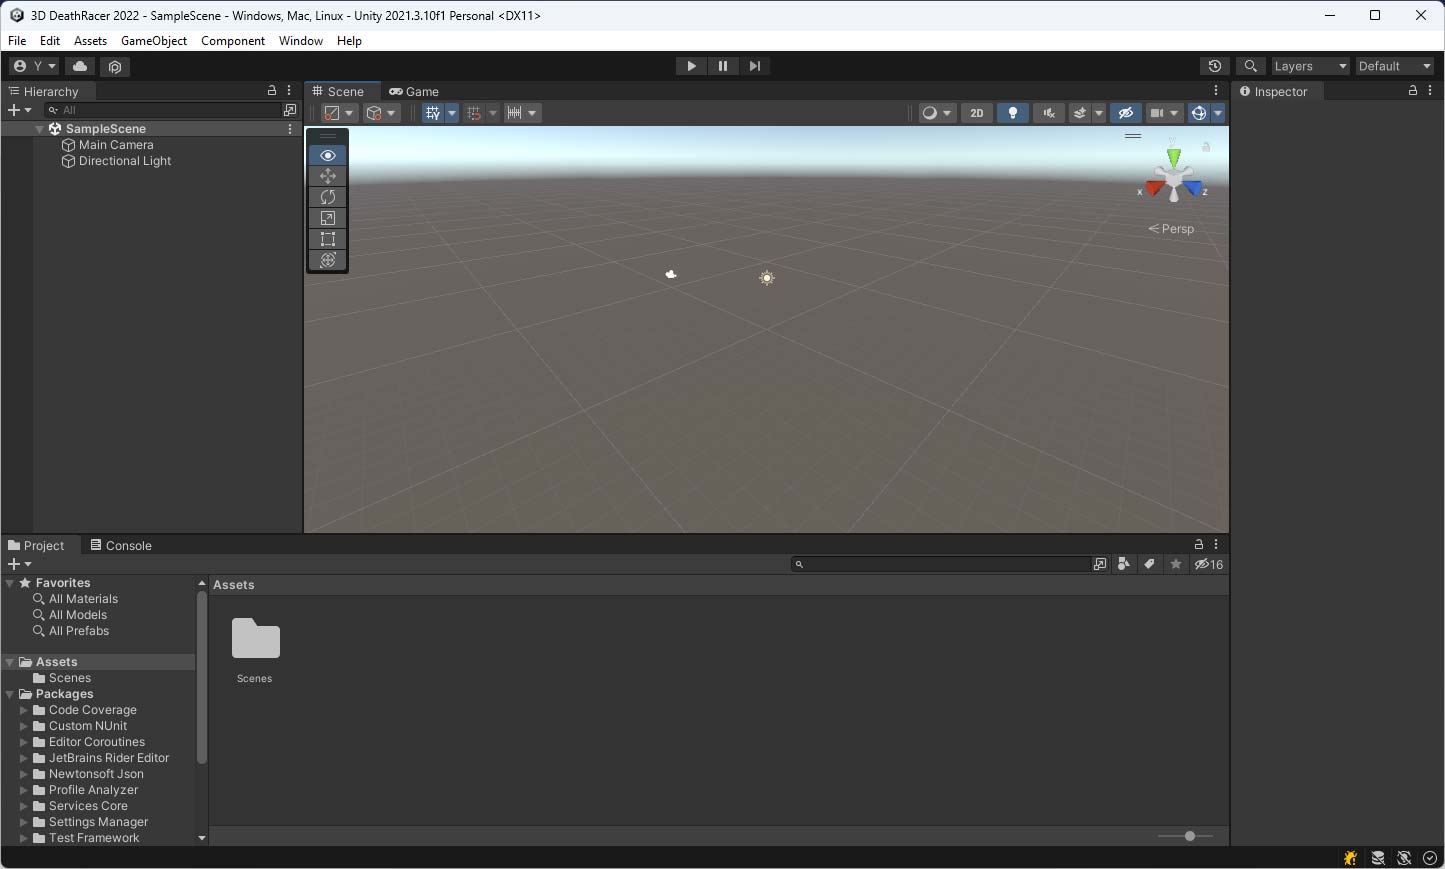 Screenshot of the unity interface